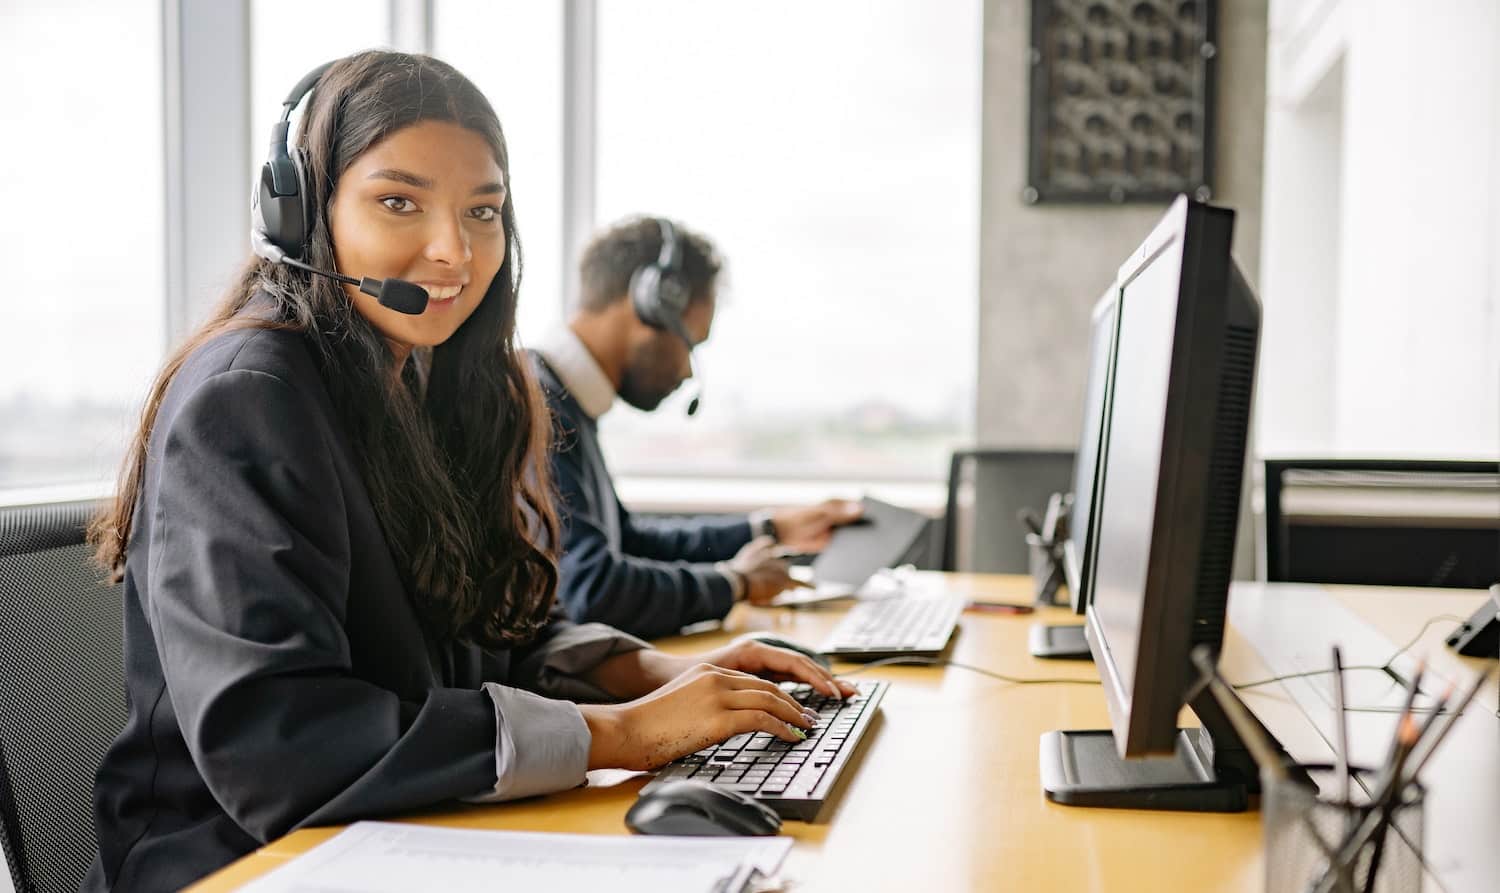 enterprise customer success manager - woman working with headset